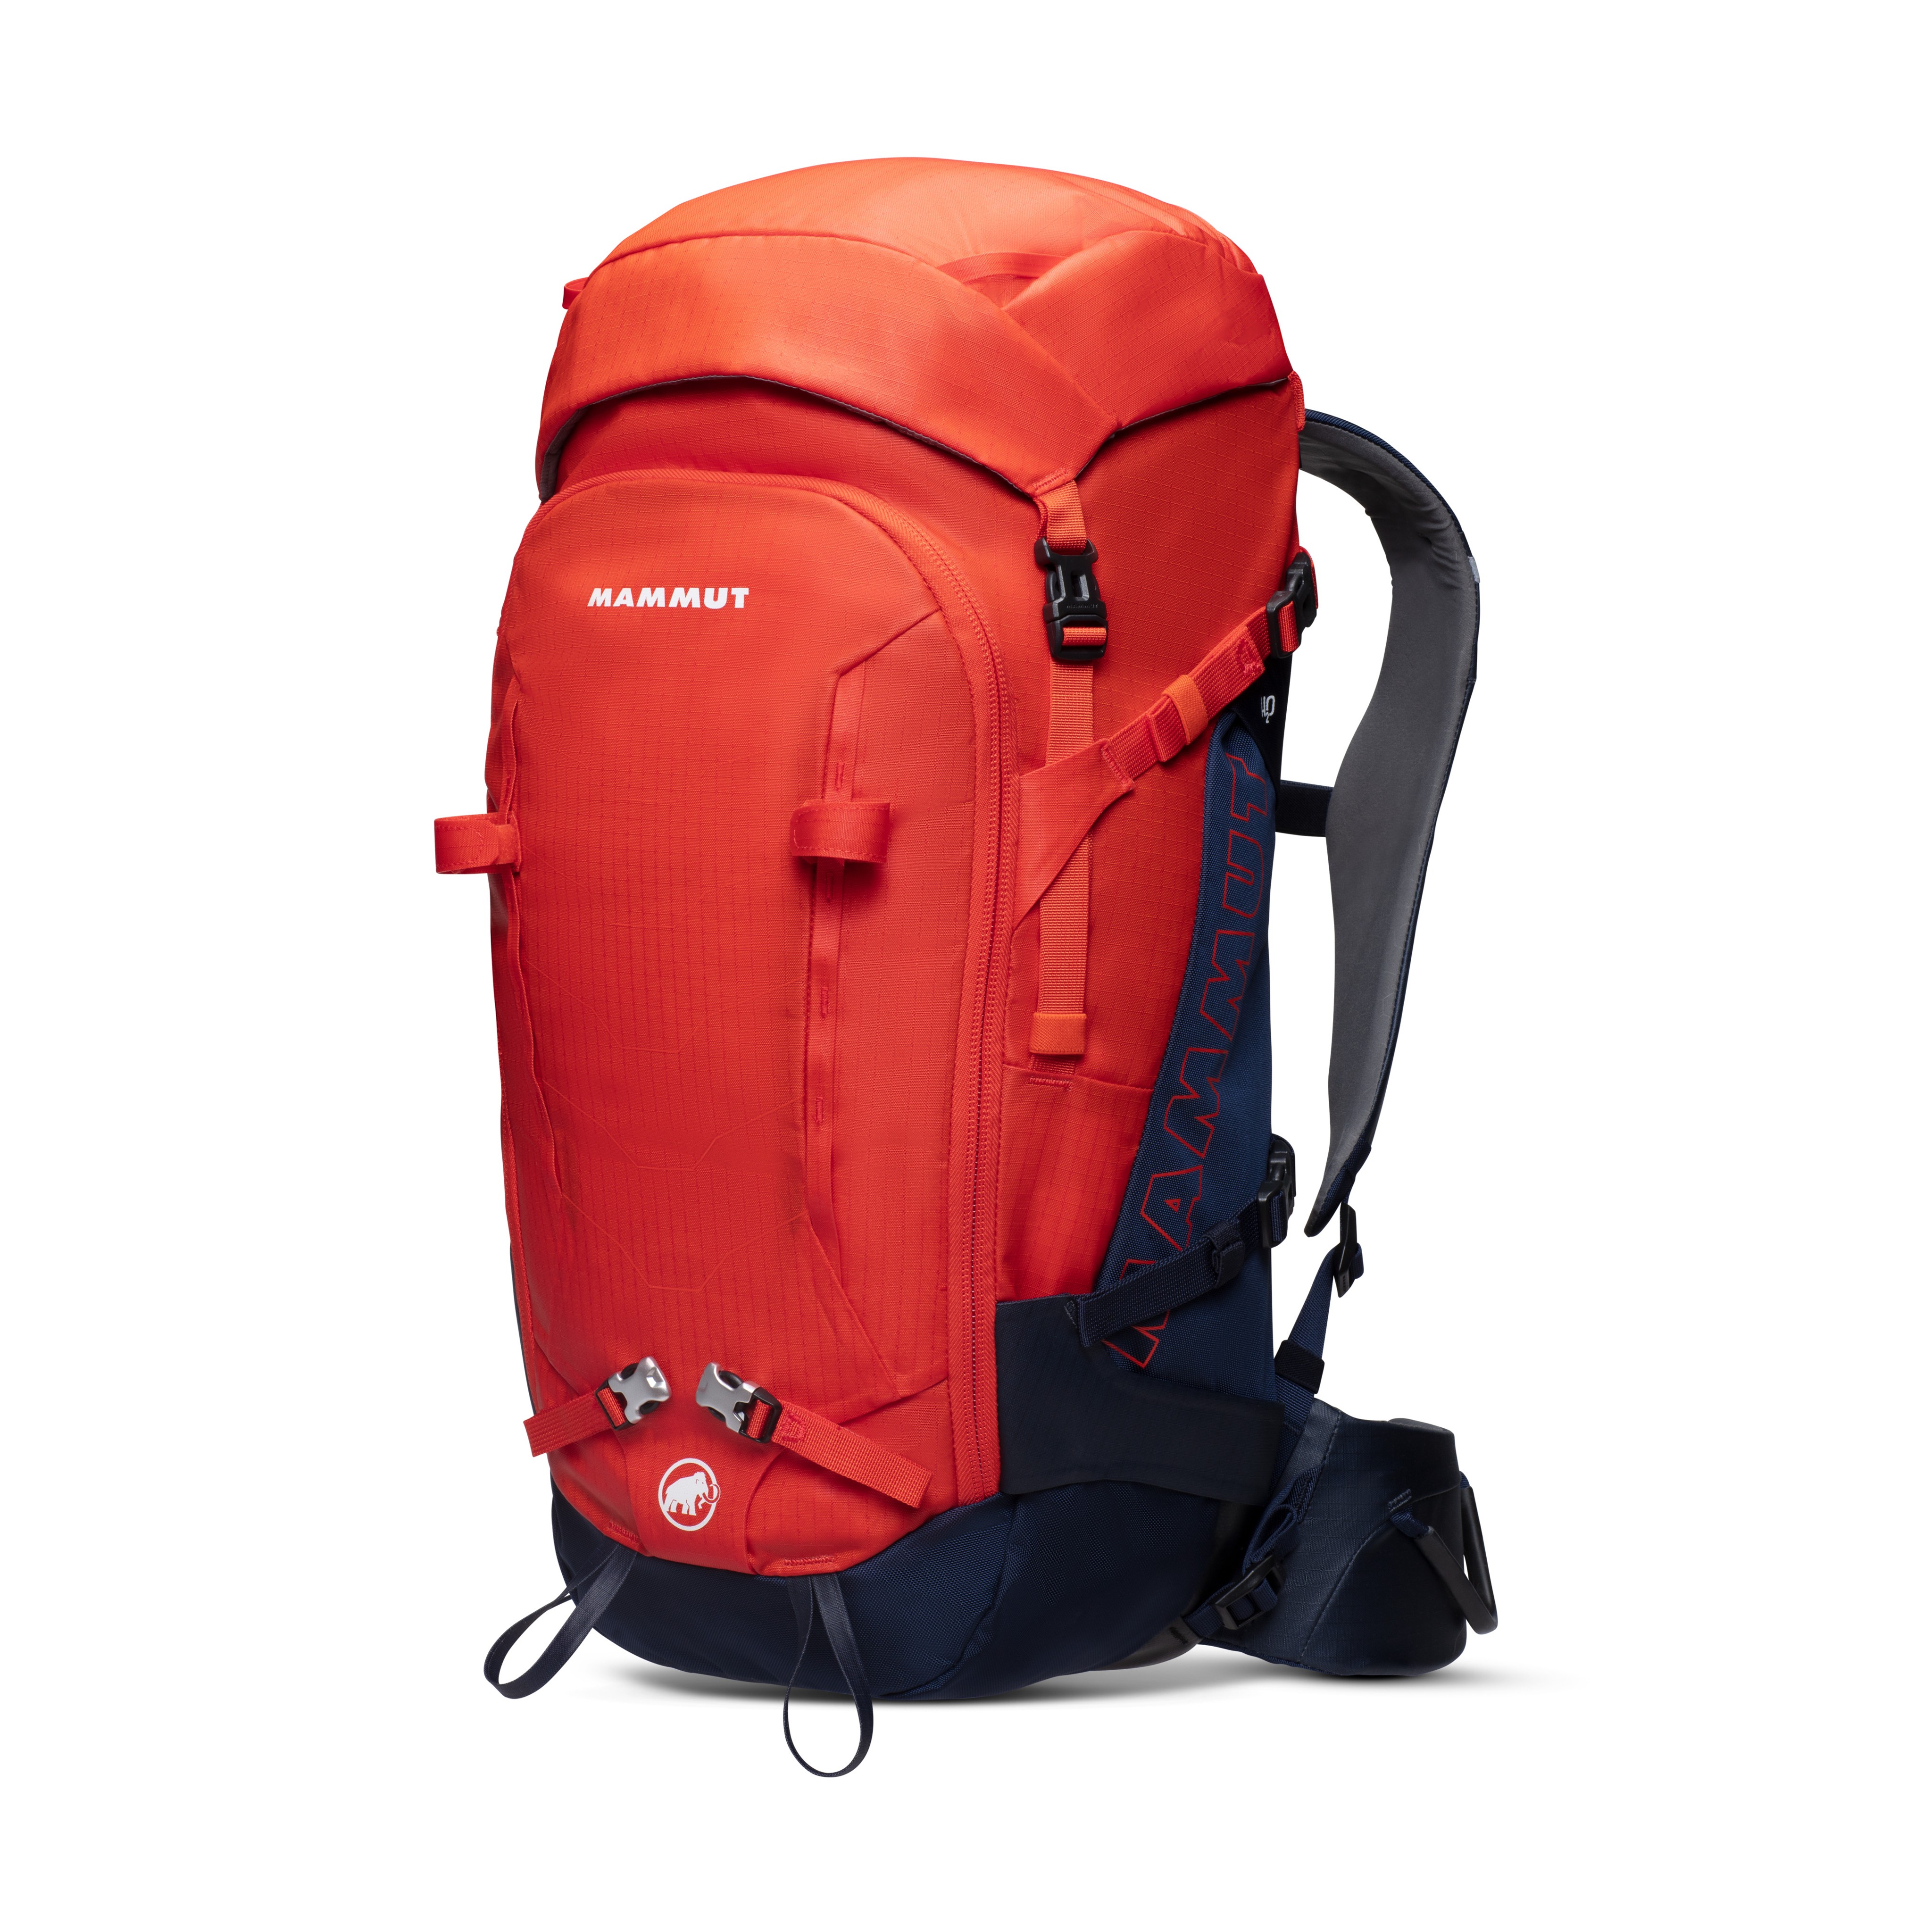 Trion Spine 35 - hot red-marine, 35 L product image